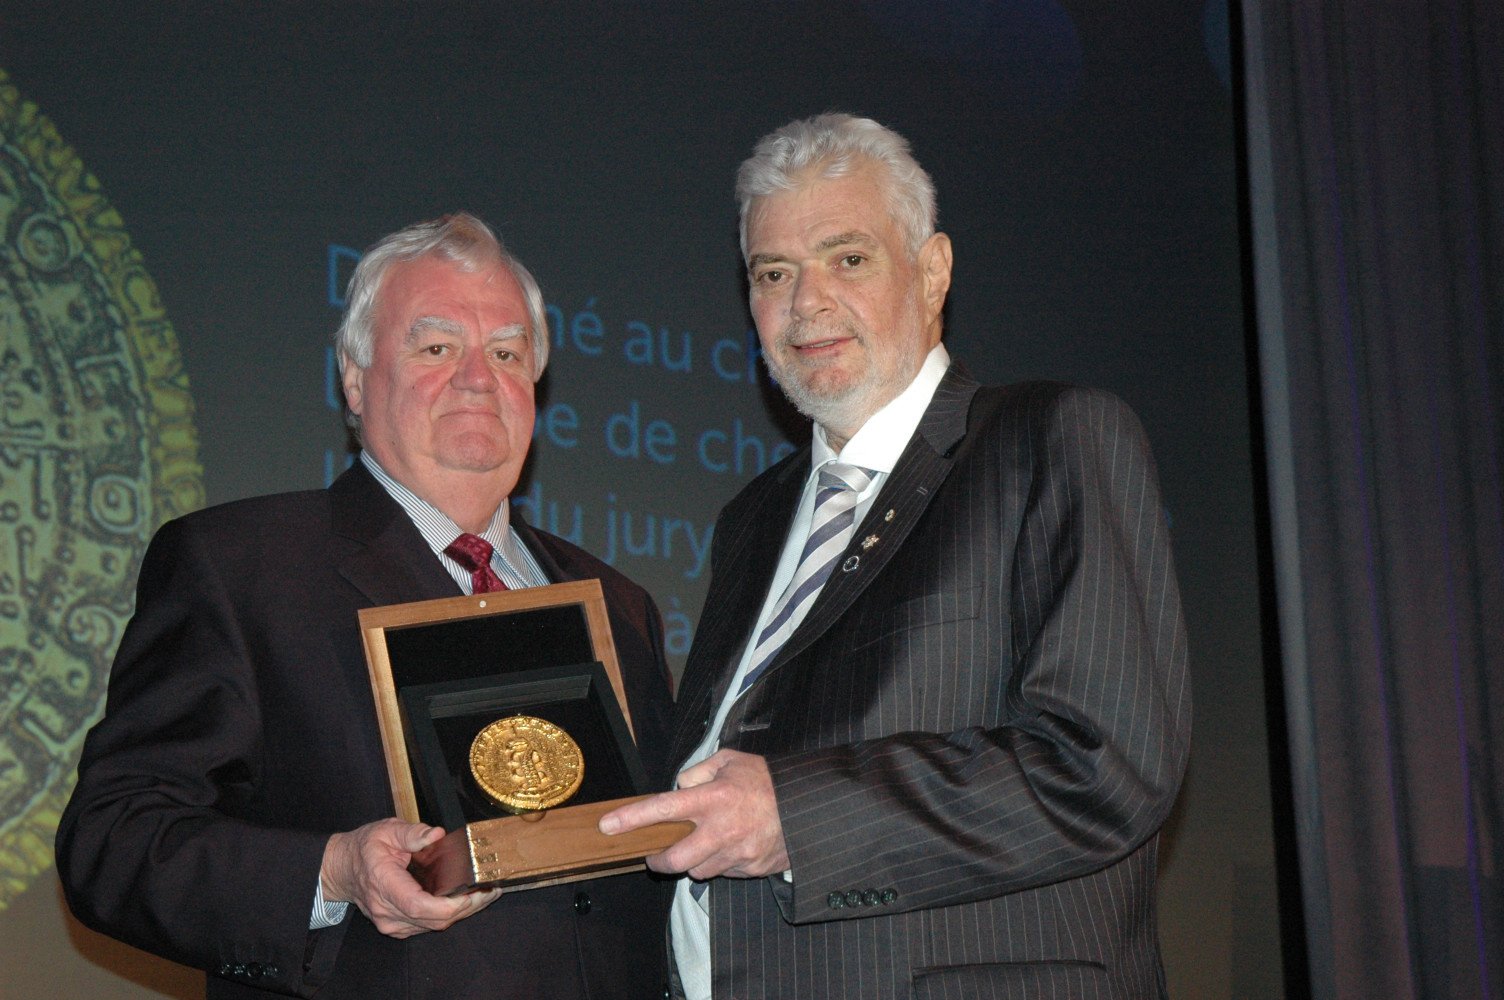 2013 - Dr. Allan Francis Plummer accepts the Prix Galien Canada 2013 - research Award
from Dr. Jacques Gagné, President of the Jury of Prix Galien Canada